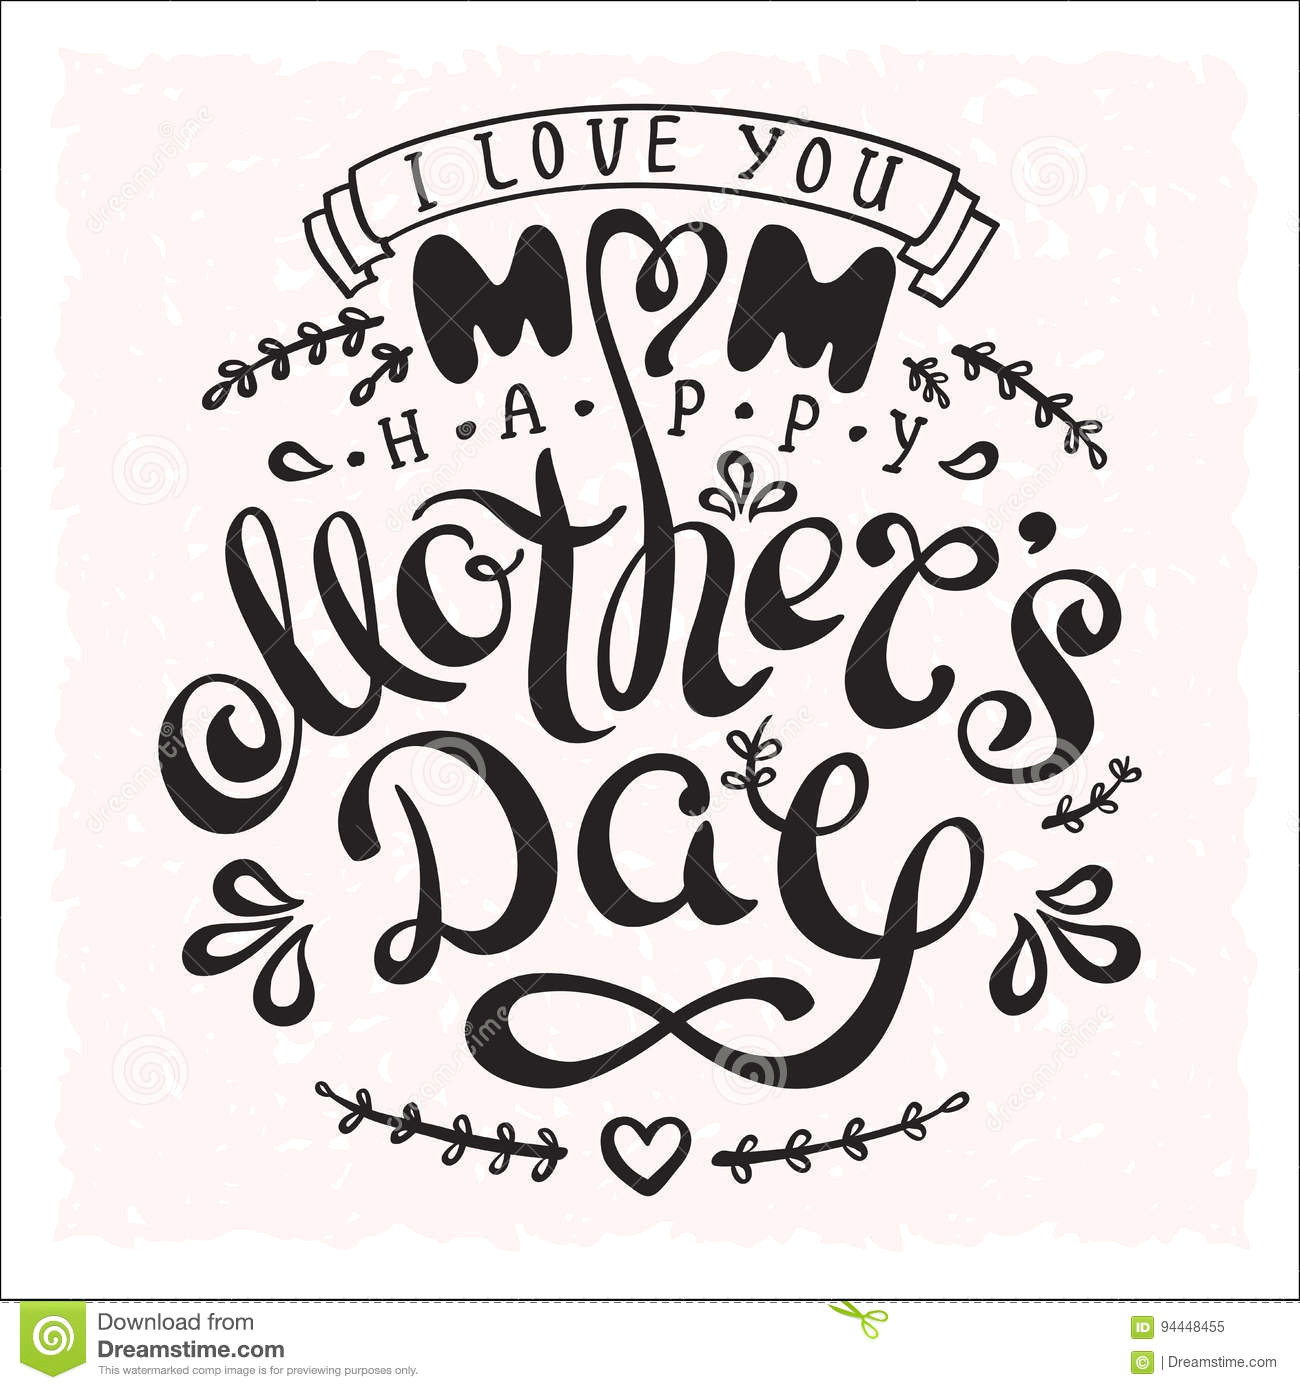 Drawing Flowers for Mother S Day Handwriting Phrase Happy Mothers Day with Drawn Flowers and Heart